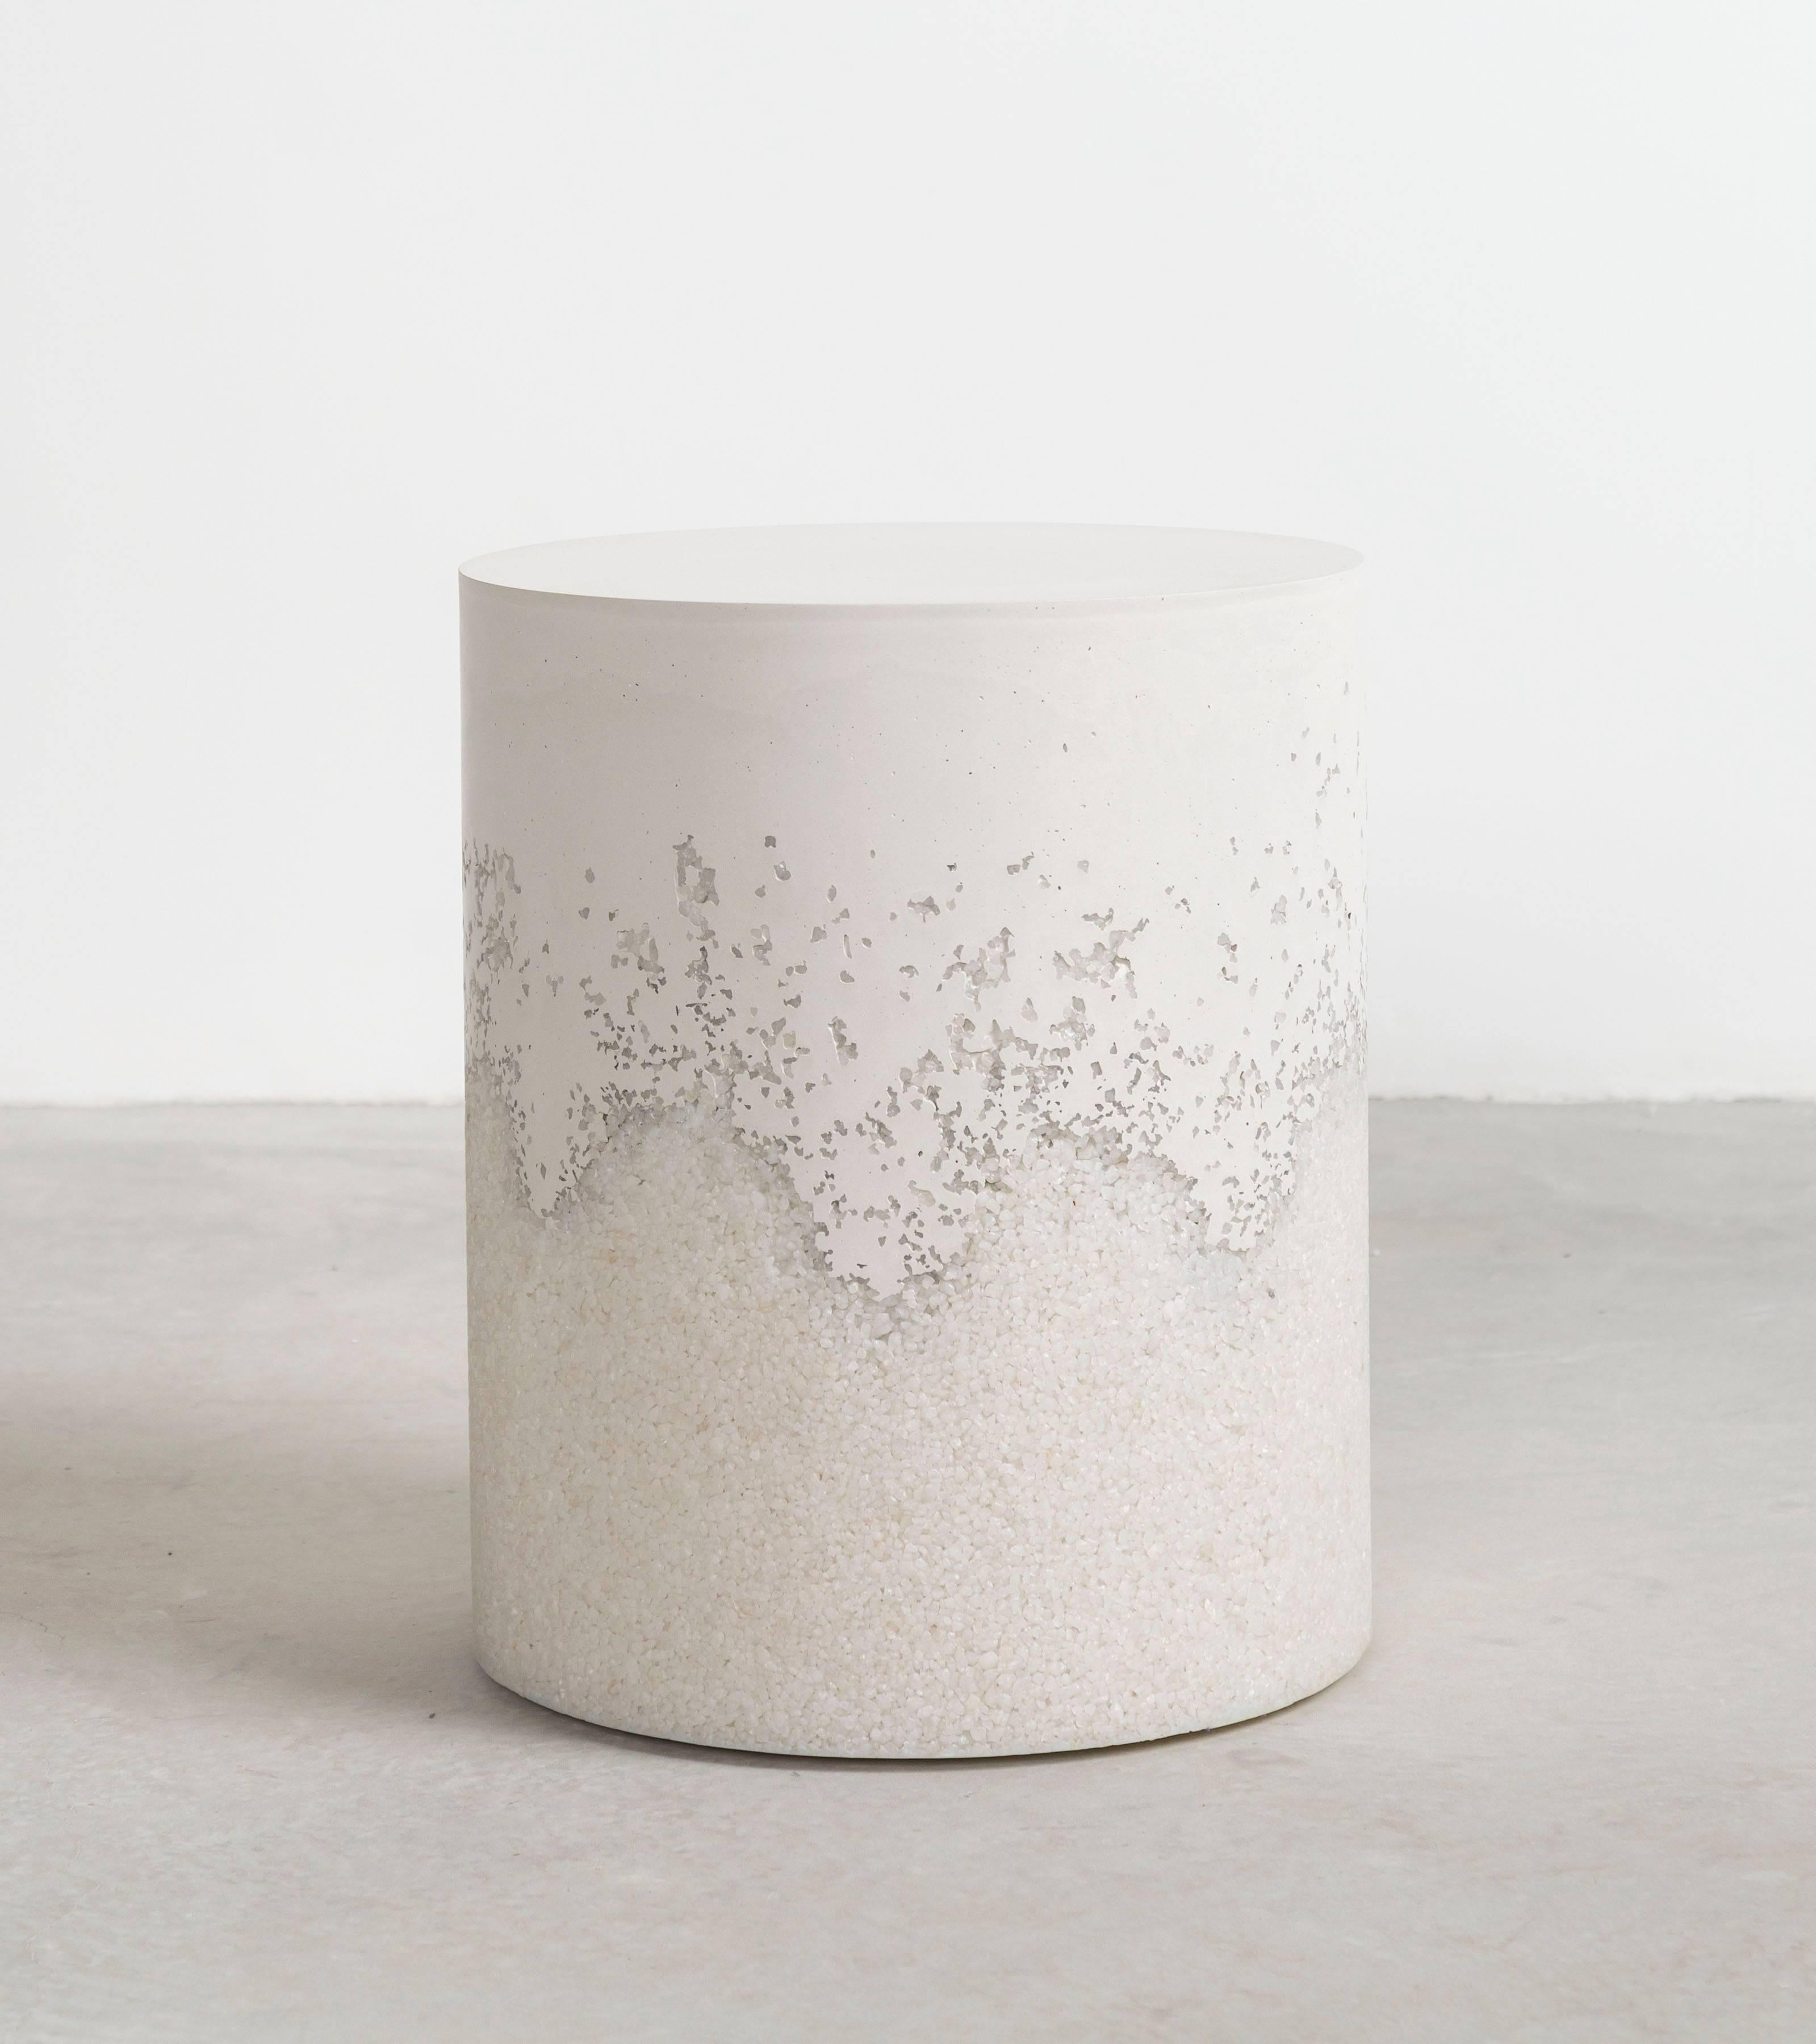 A layering of cement and crushed aggregates, the made-to-order drum consists of an hand-dyed white cement top and a packed crystal quartz bottom. Poured by hand over the jagged minerals, the white cement merges the materials to create a unique